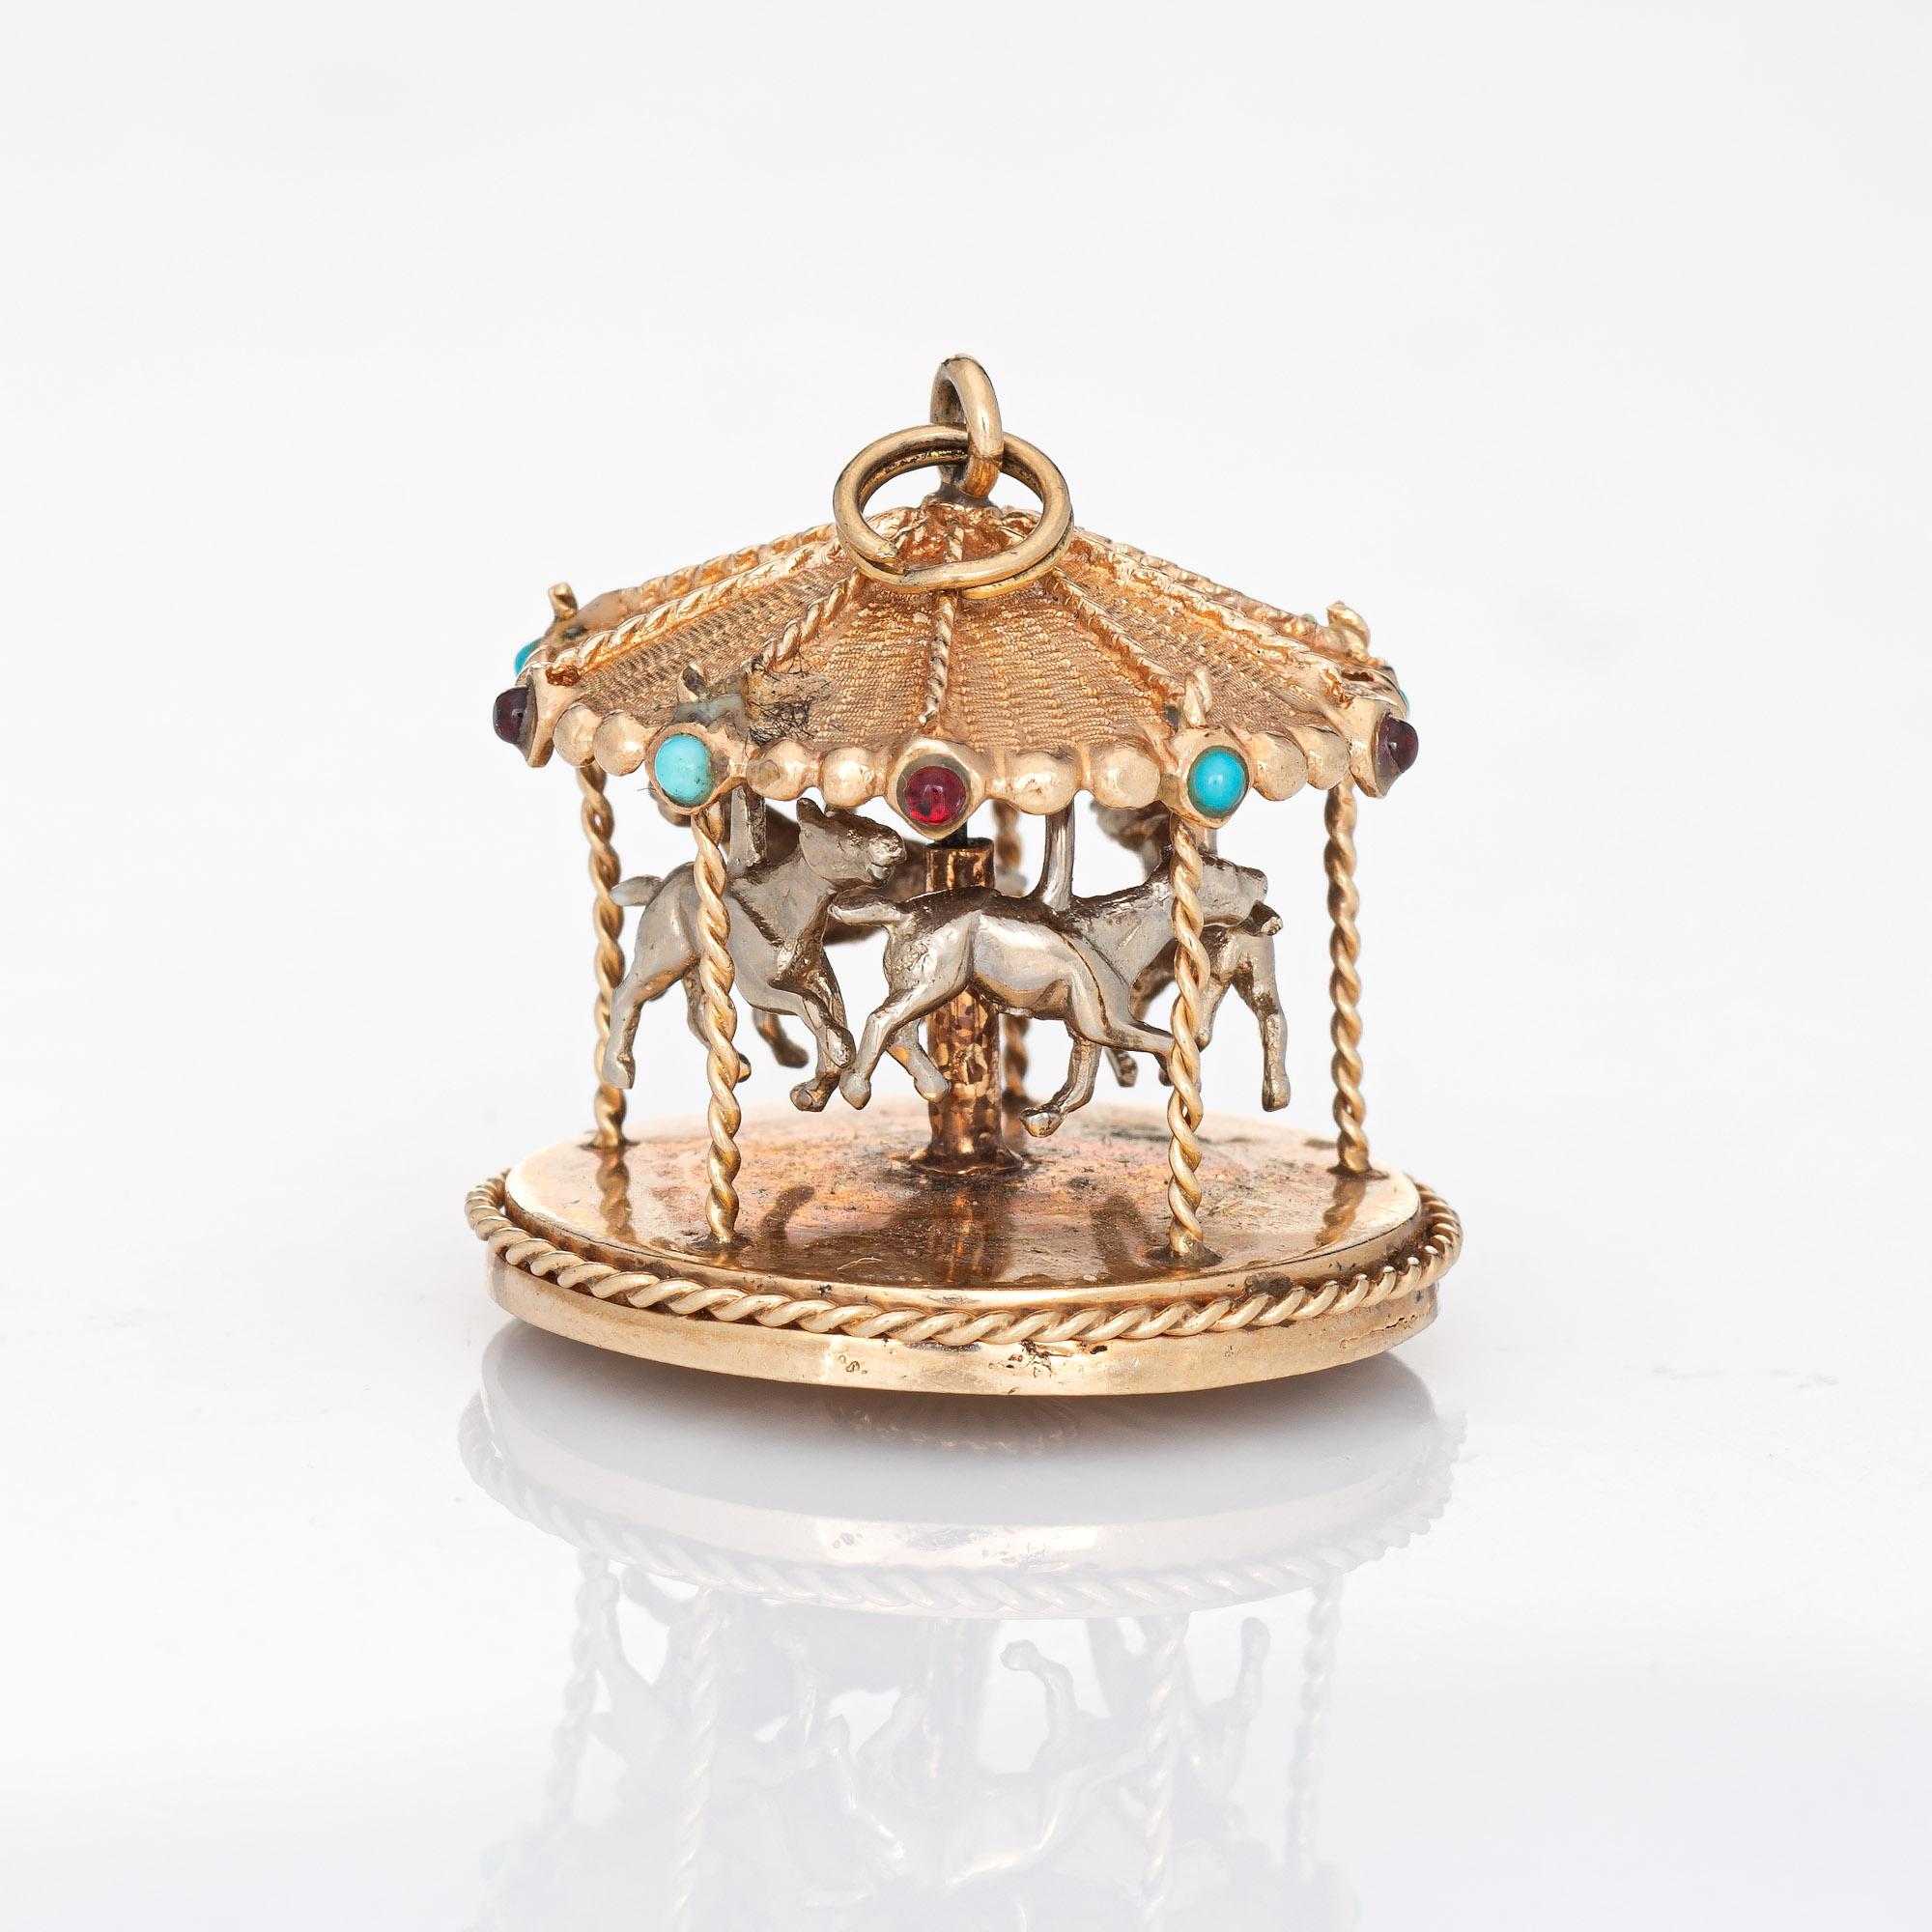 Finely detailed vintage Carousel charm crafted in 14k yellow gold (circa 1960s).  

Turquoise and garnet cabochons are set into the canopy of the charm. Note: one garnet is missing.  

The unique charm is crafted in the form of a merry-go-round. The